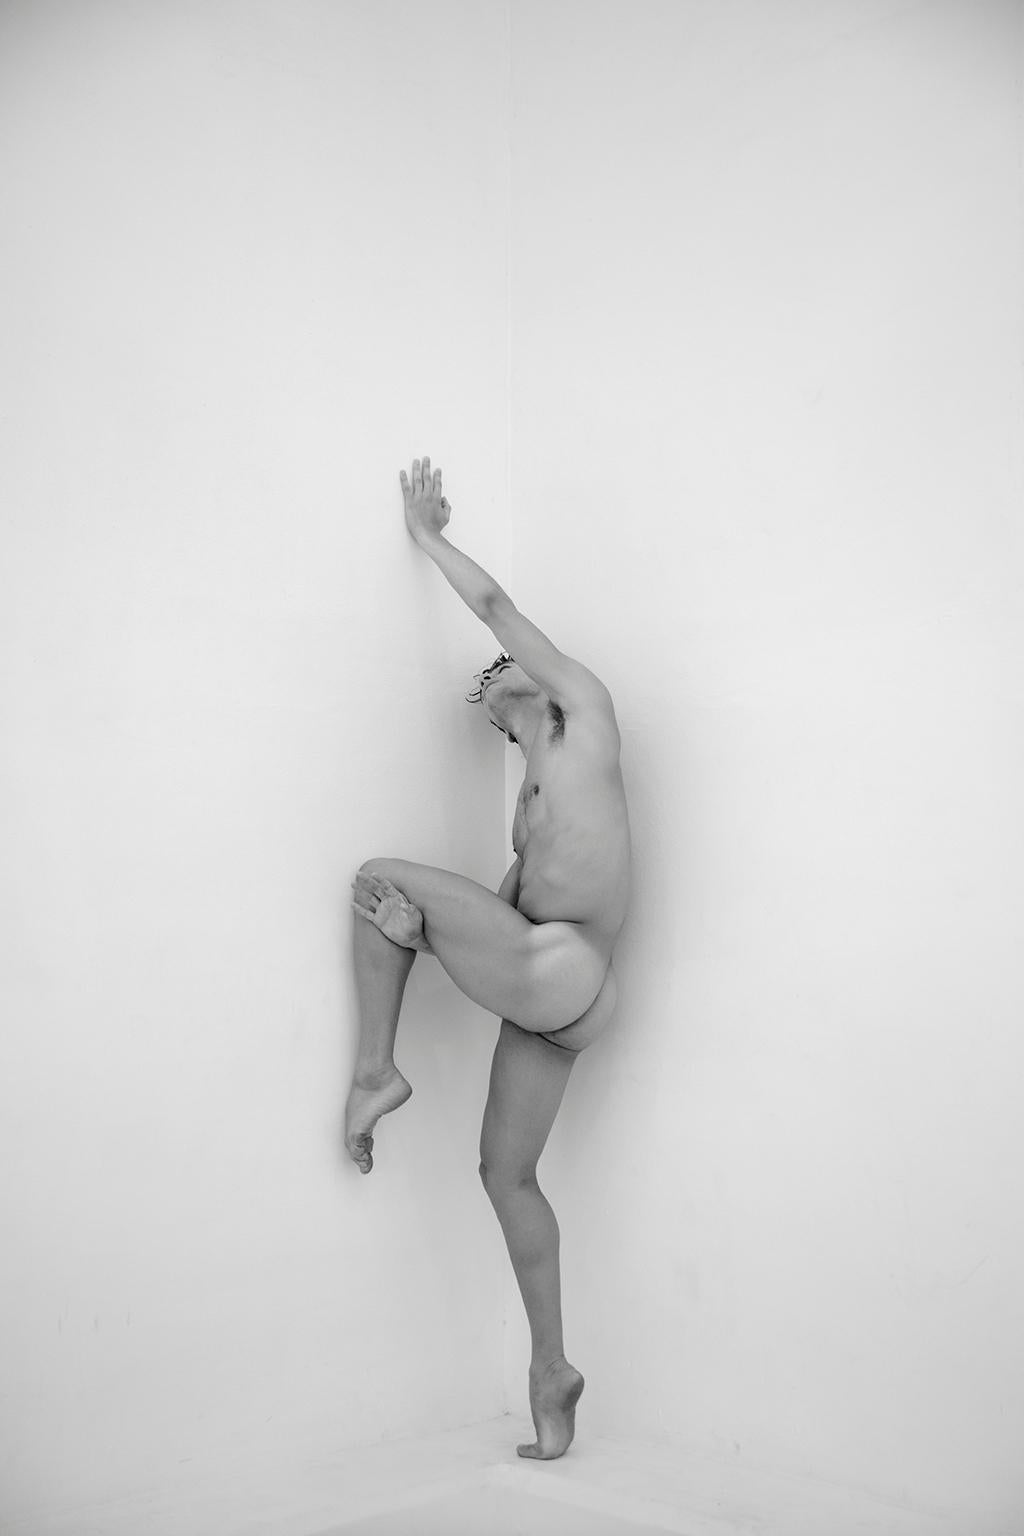 Man against wall Two by Ricky Cohete 
From Motion series
Black and White Photograph
Archival pigment print
Medium 36"x24"
Ed of 10 + 1AP

Throughout his exploration of the movement of the body, with modern and ballet dancers, as well as a focal